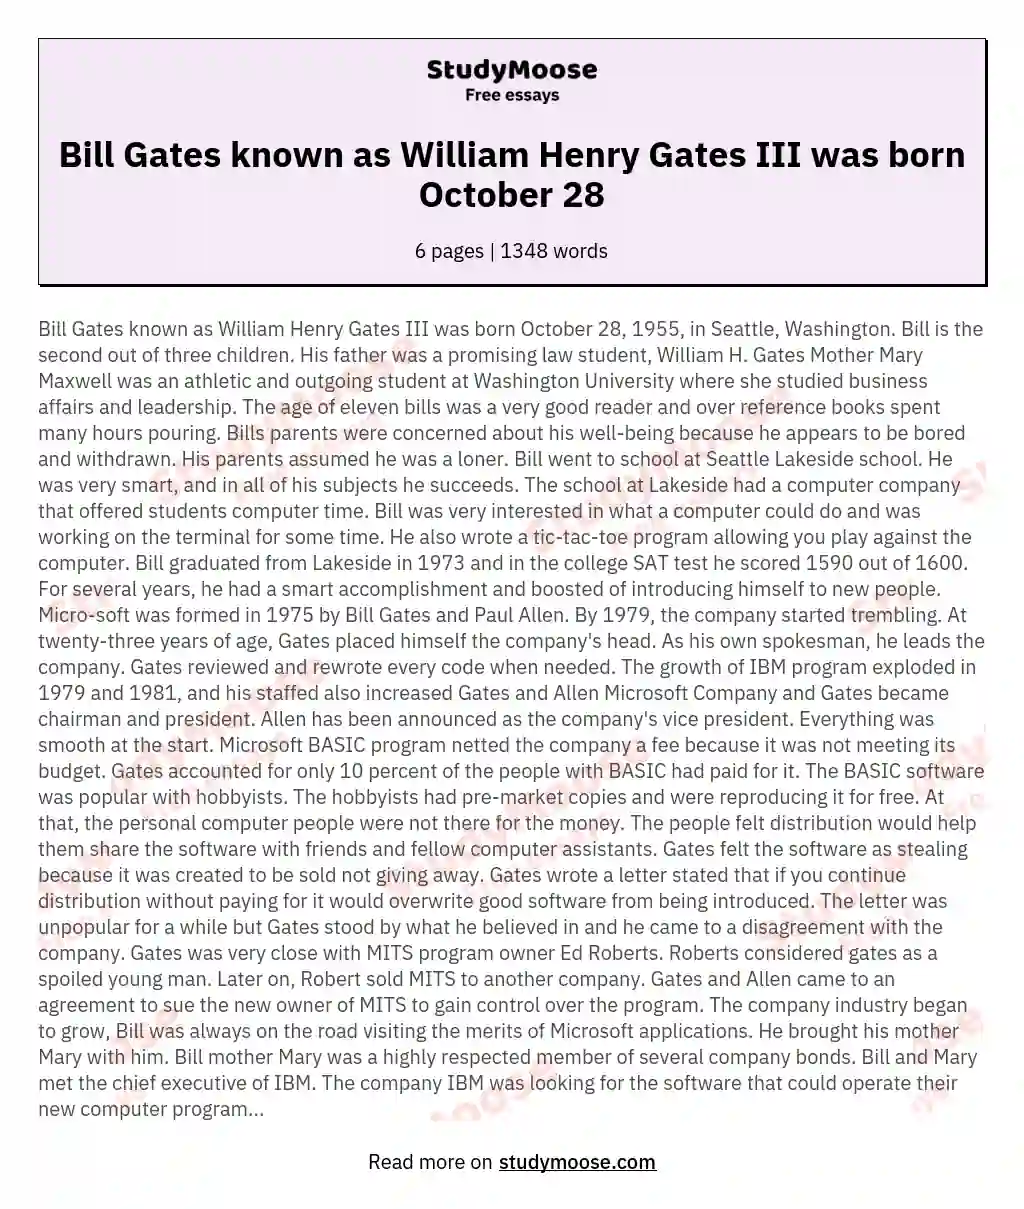 Bill Gates known as William Henry Gates III was born October 28